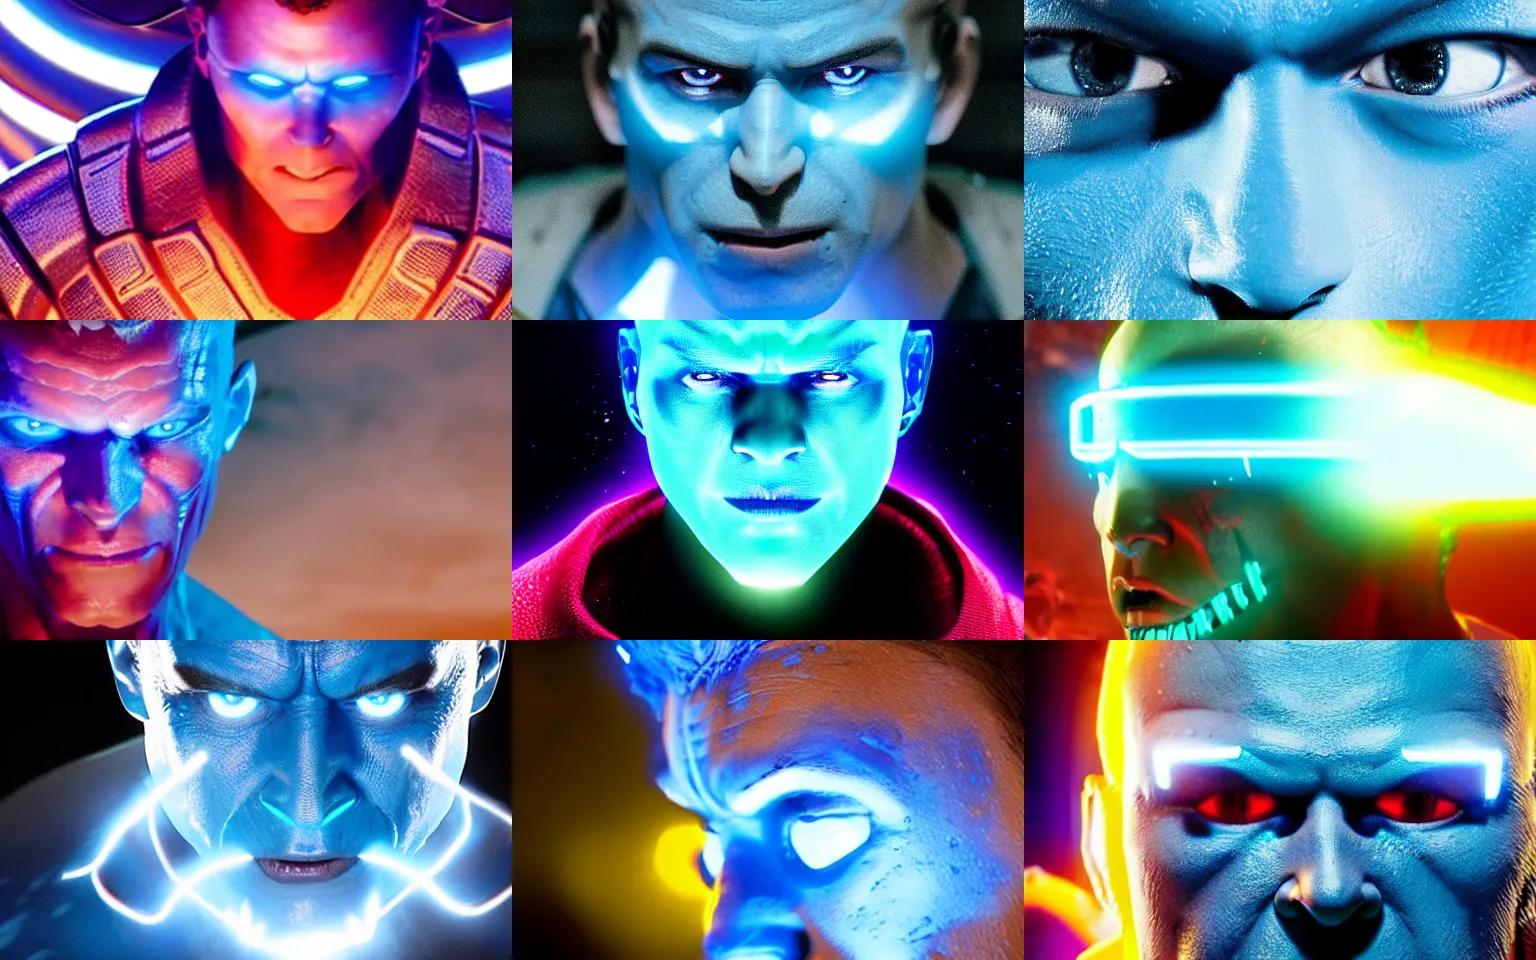 Prompt: still frame from blockbuster comicbook movie showing a closeup of a character with glowing blue skin, their face in profile, showcasing impressive groundbreaking cgi with subsurface illumination effects which make the character appear to be made of cherenkov radiation.